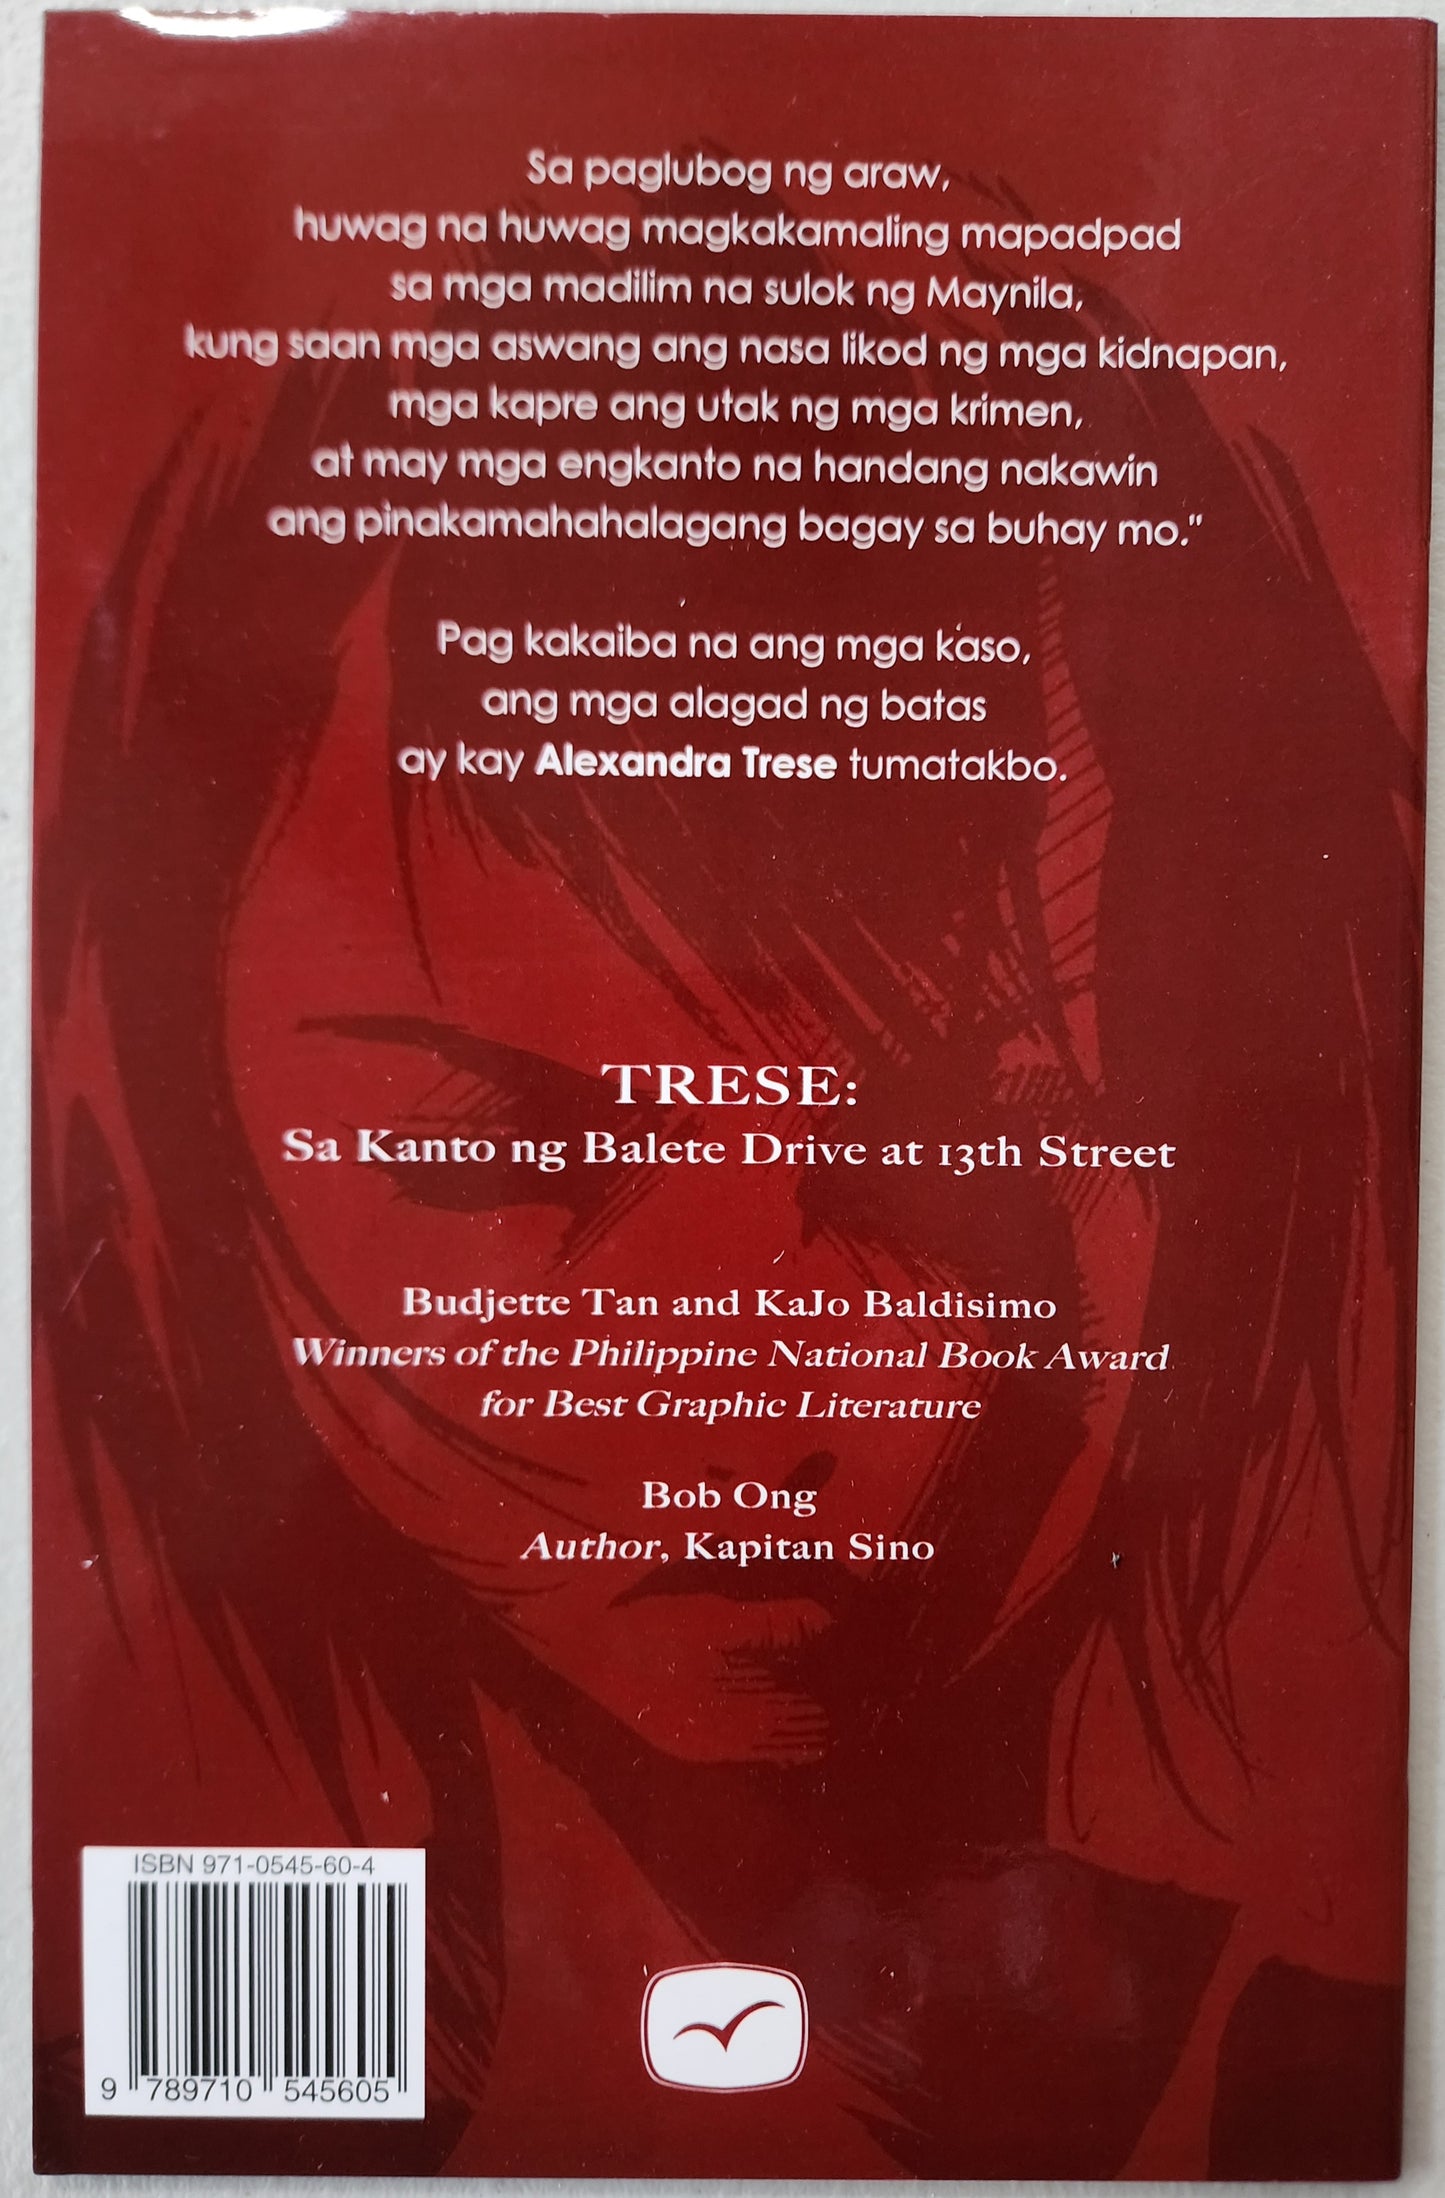 TRESE #1 (IN TAGALOG PHILIPPINES)